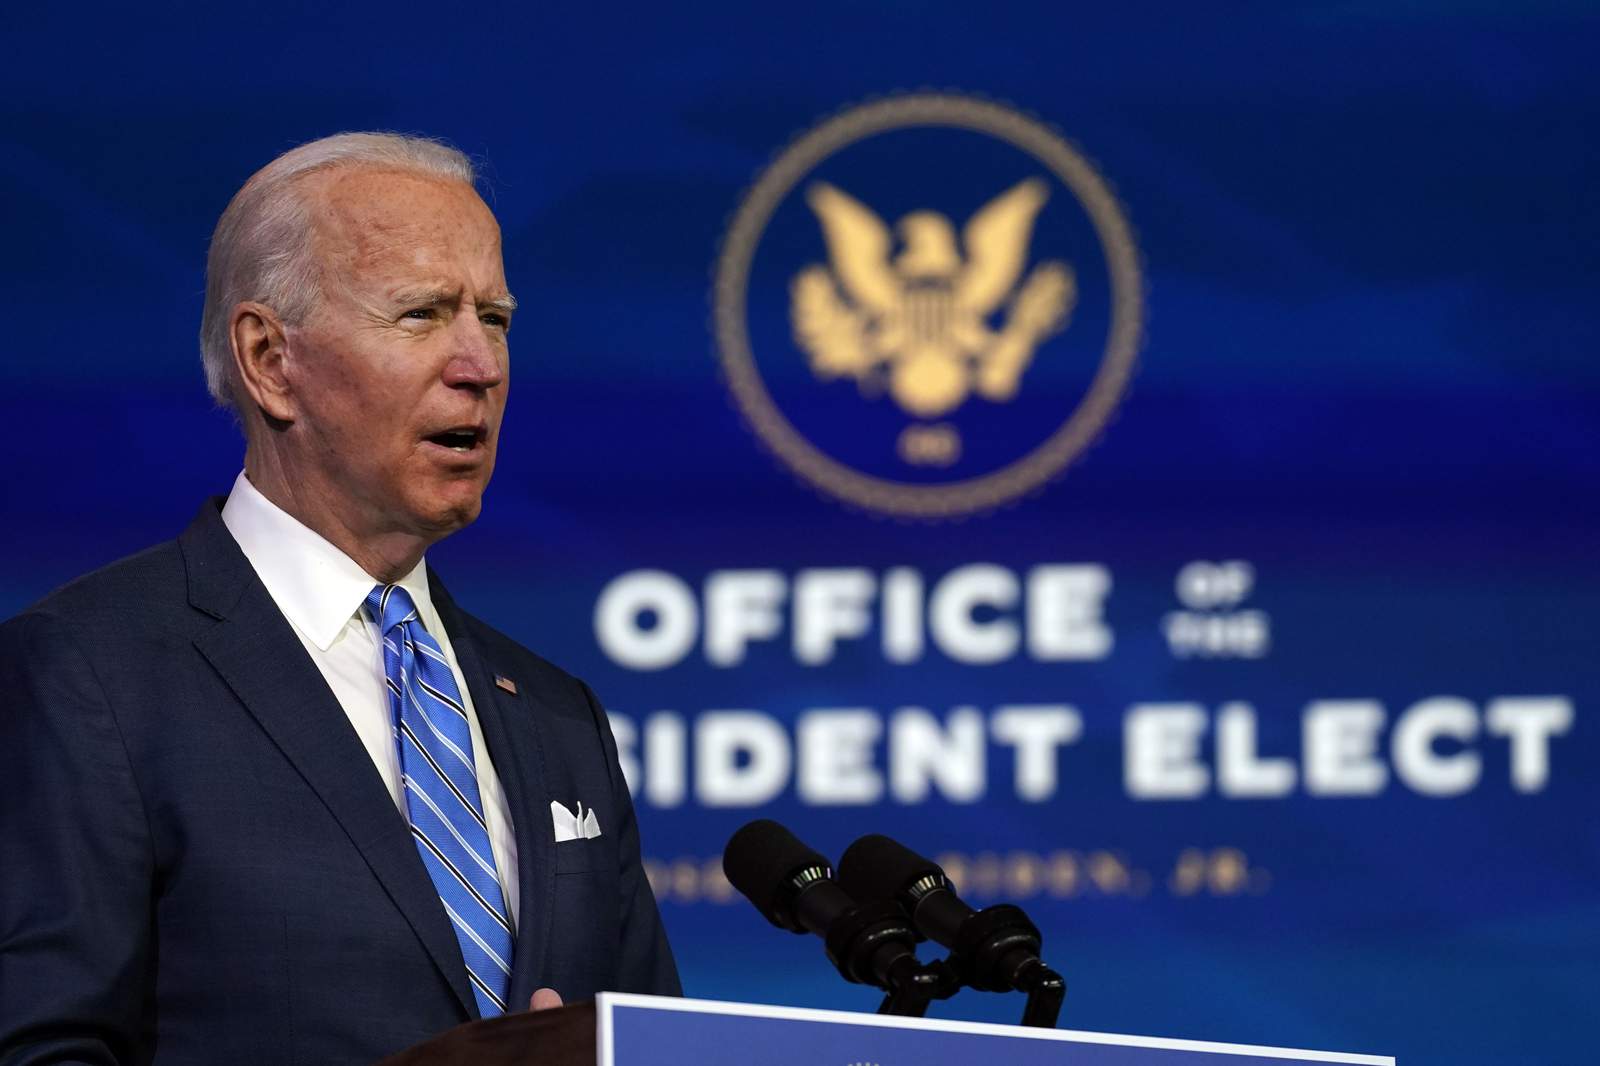 $1,400 checks to most Americans included in Biden’s COVID-19 plan